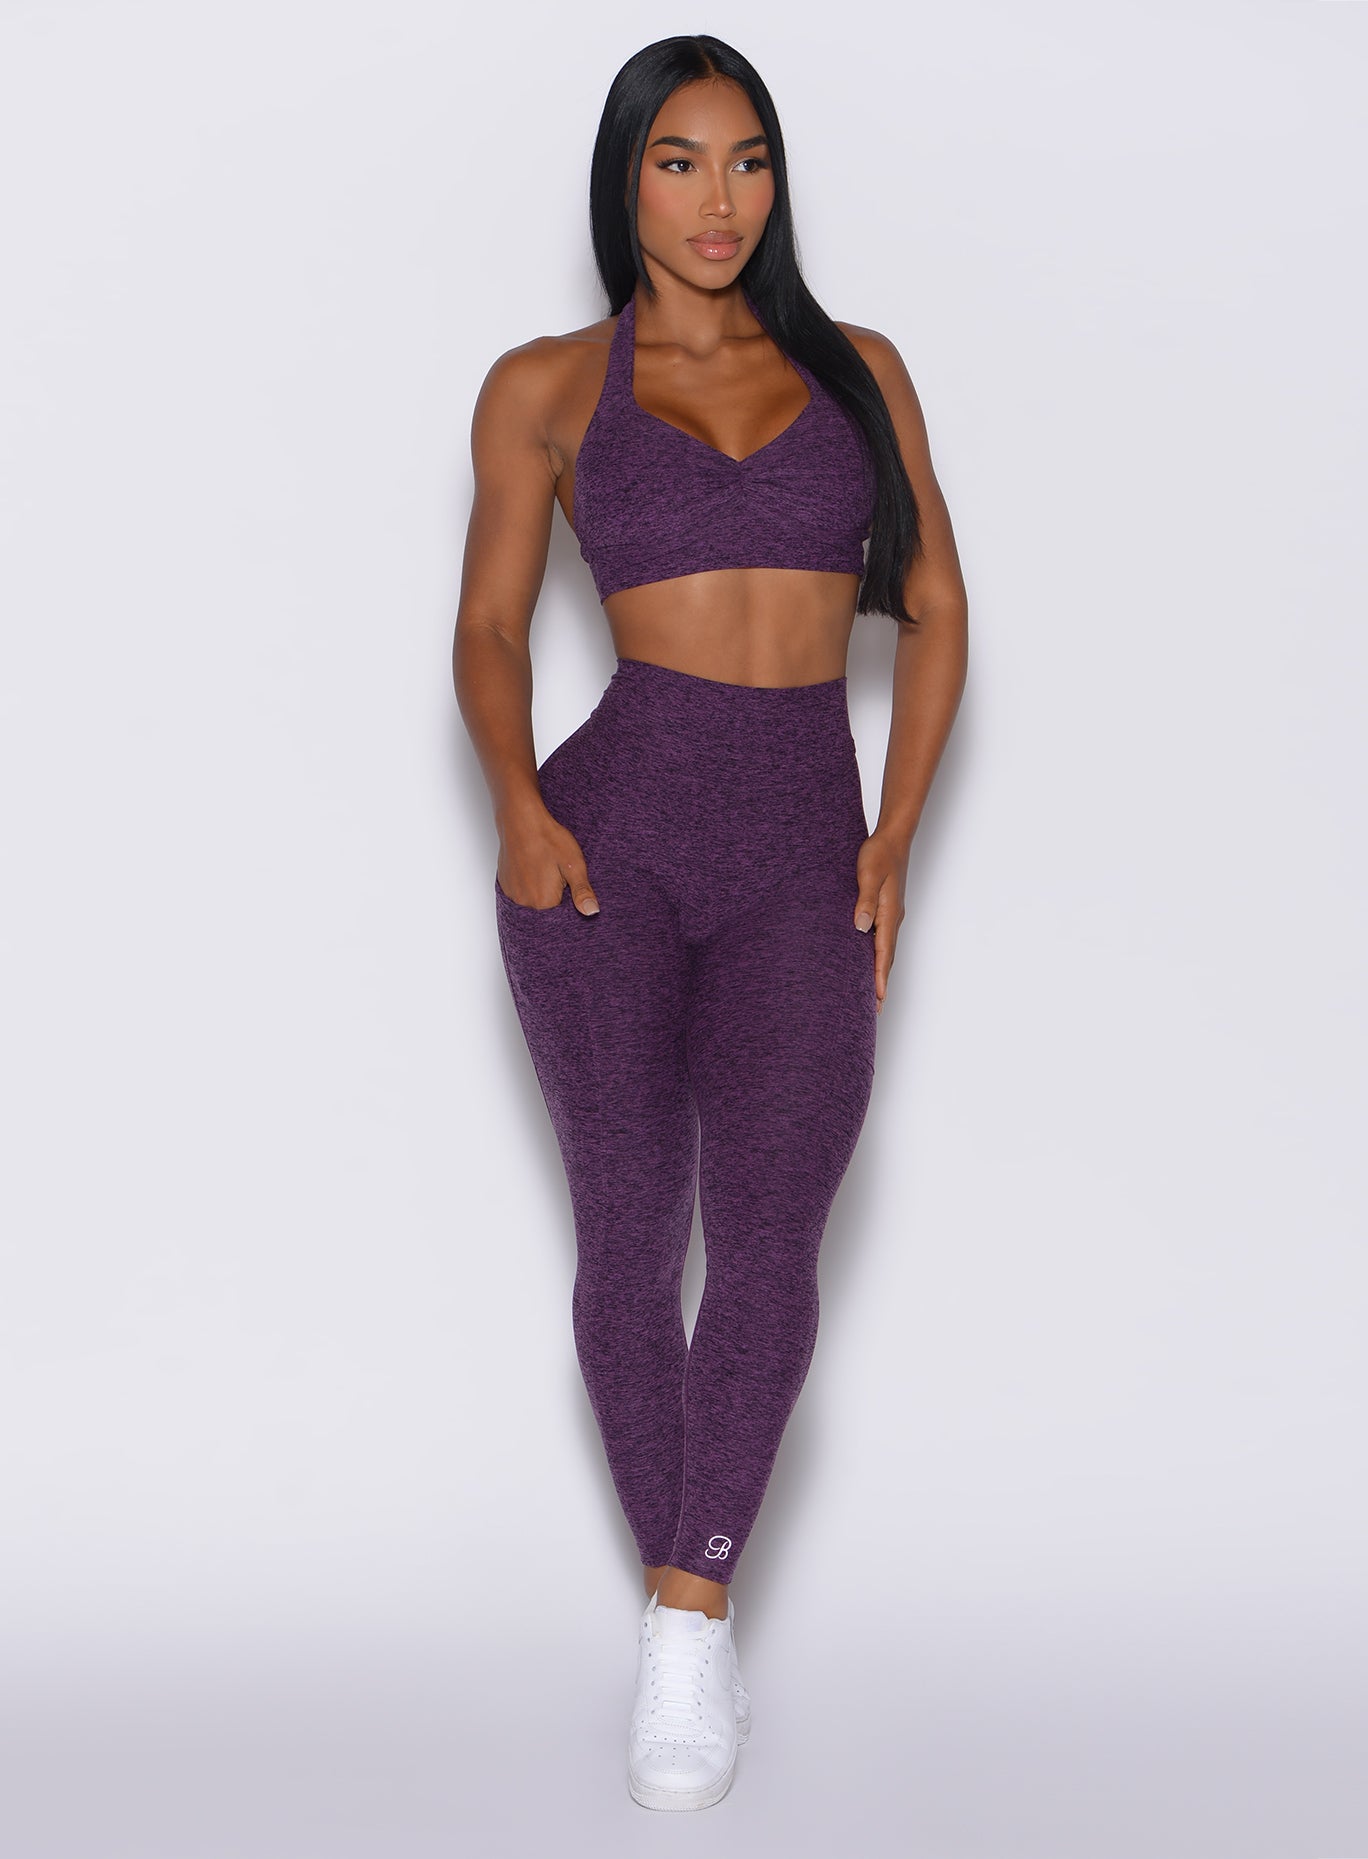 Model facing forward wearing our V back leggings in purple passion color and a matching bra 